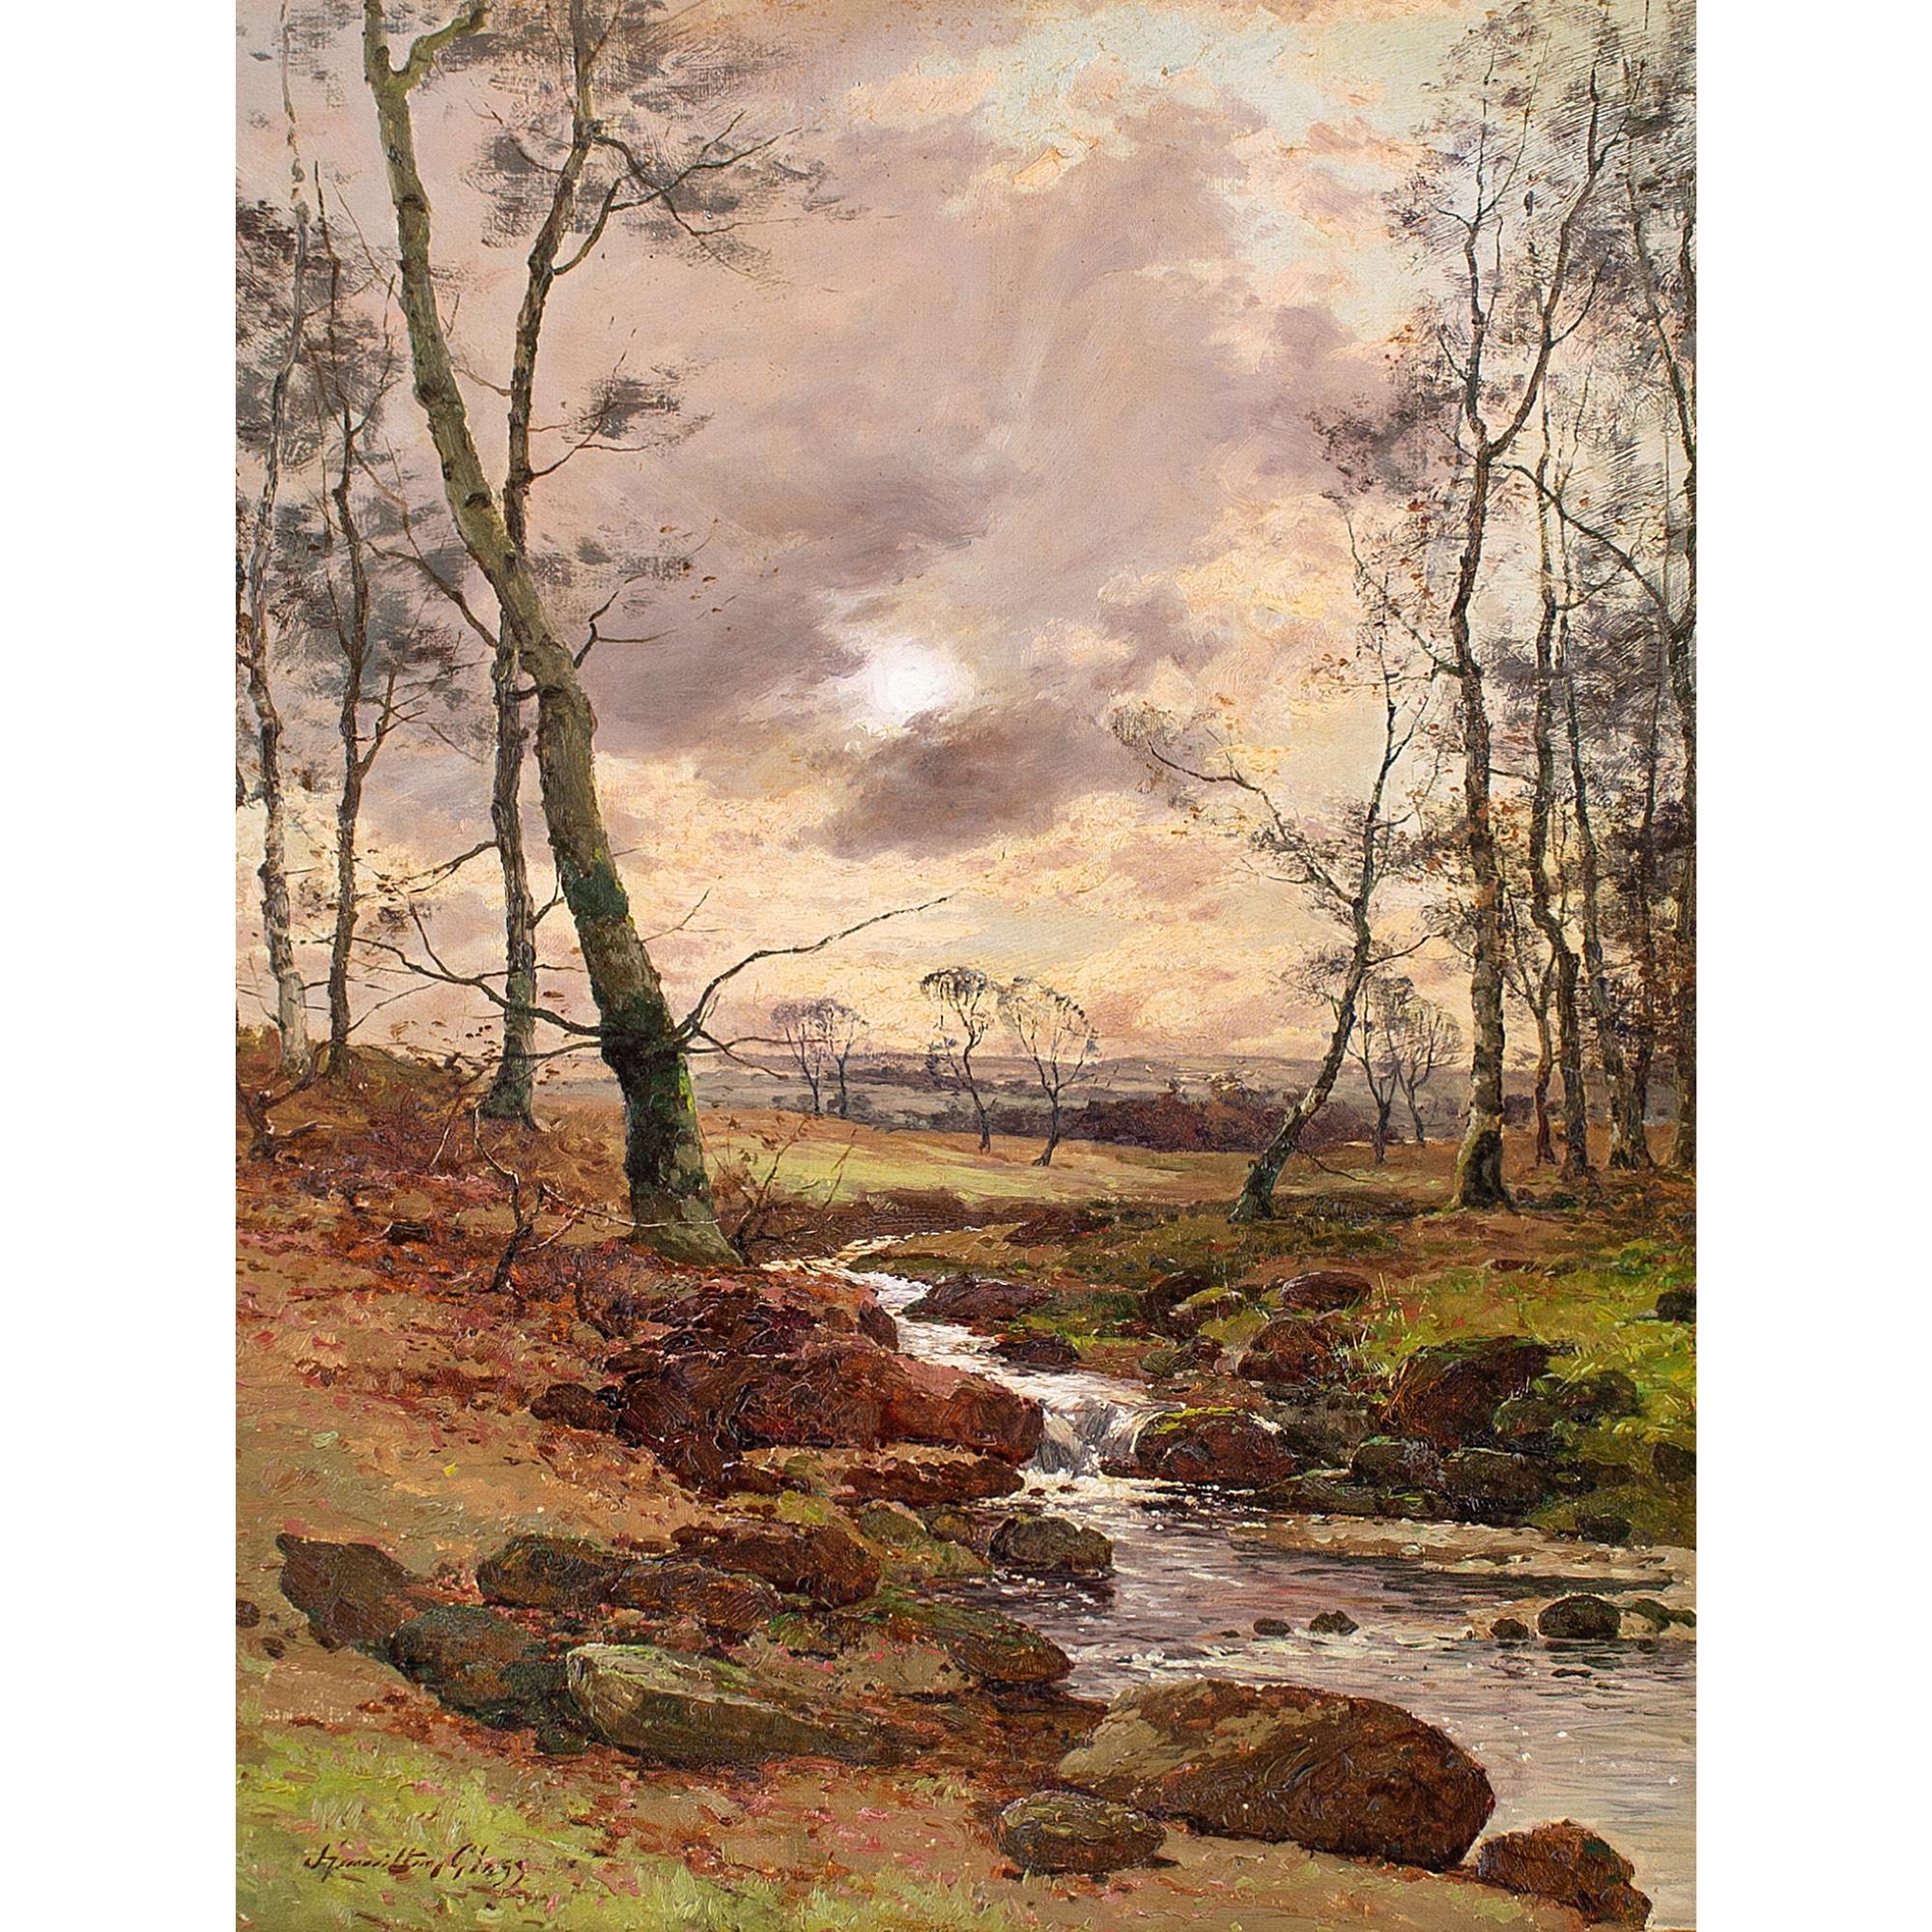 This early 20th-century oil painting by Scottish artist John Hamilton Glass SSA (1870-1955) depicts a rugged Scottish landscape with a winding river.

John Hamilton Glass SSA (1864-1940) was primarily known for his depictions of rugged scenery in a